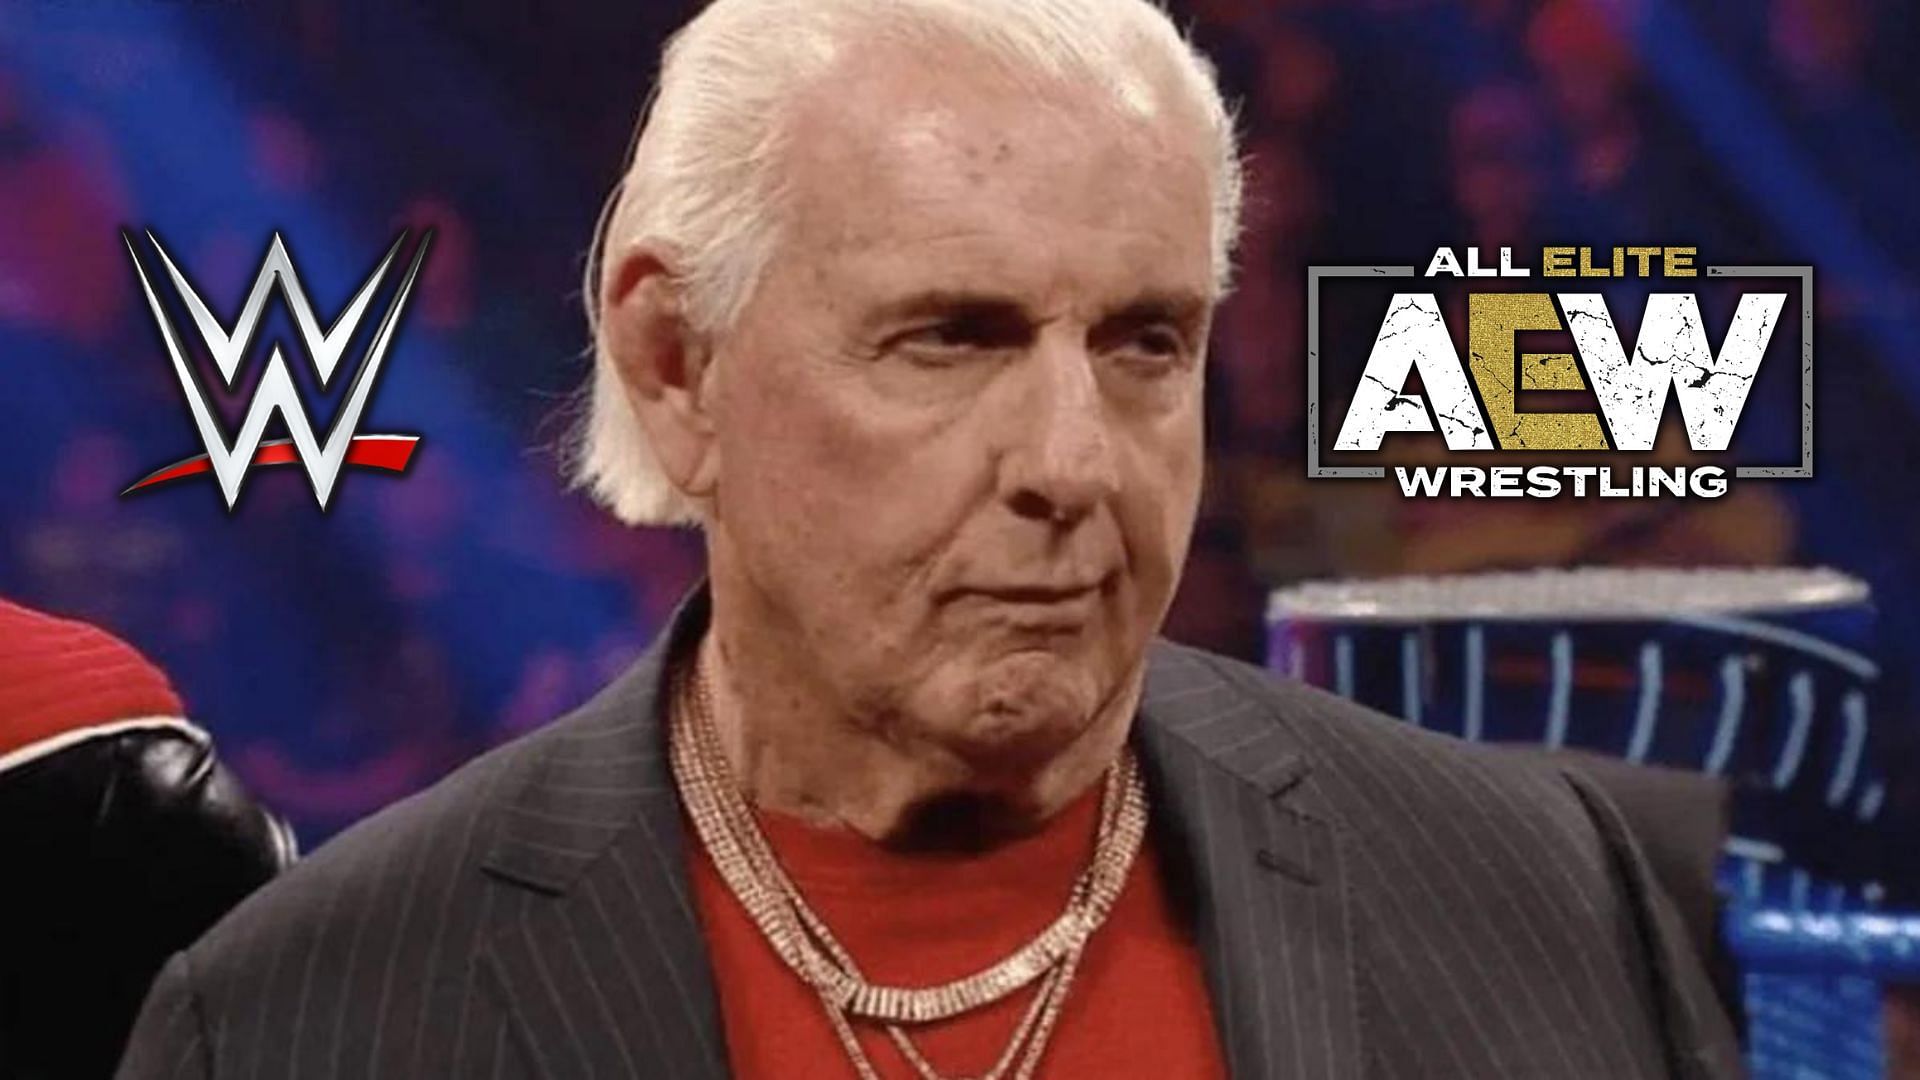 "It's insanity" - Ric Flair gets brutally honest on AEW and WWE competing